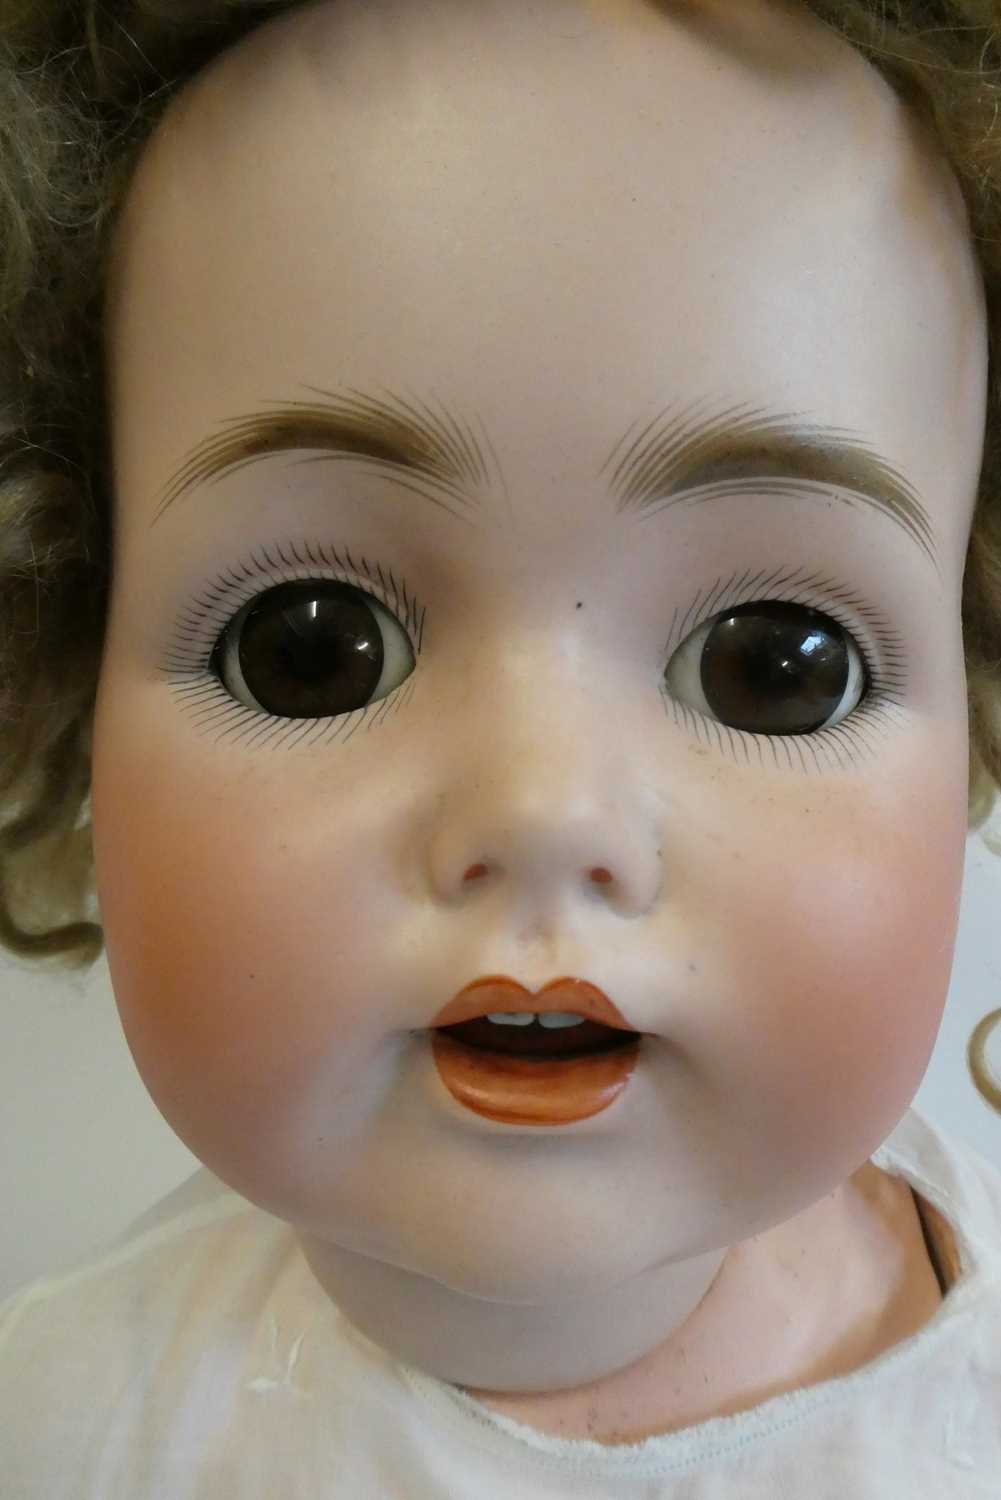 A J.D. Kestner bisque socket head character doll, with brown glass sleeping eyes, open mouth, - Image 2 of 3